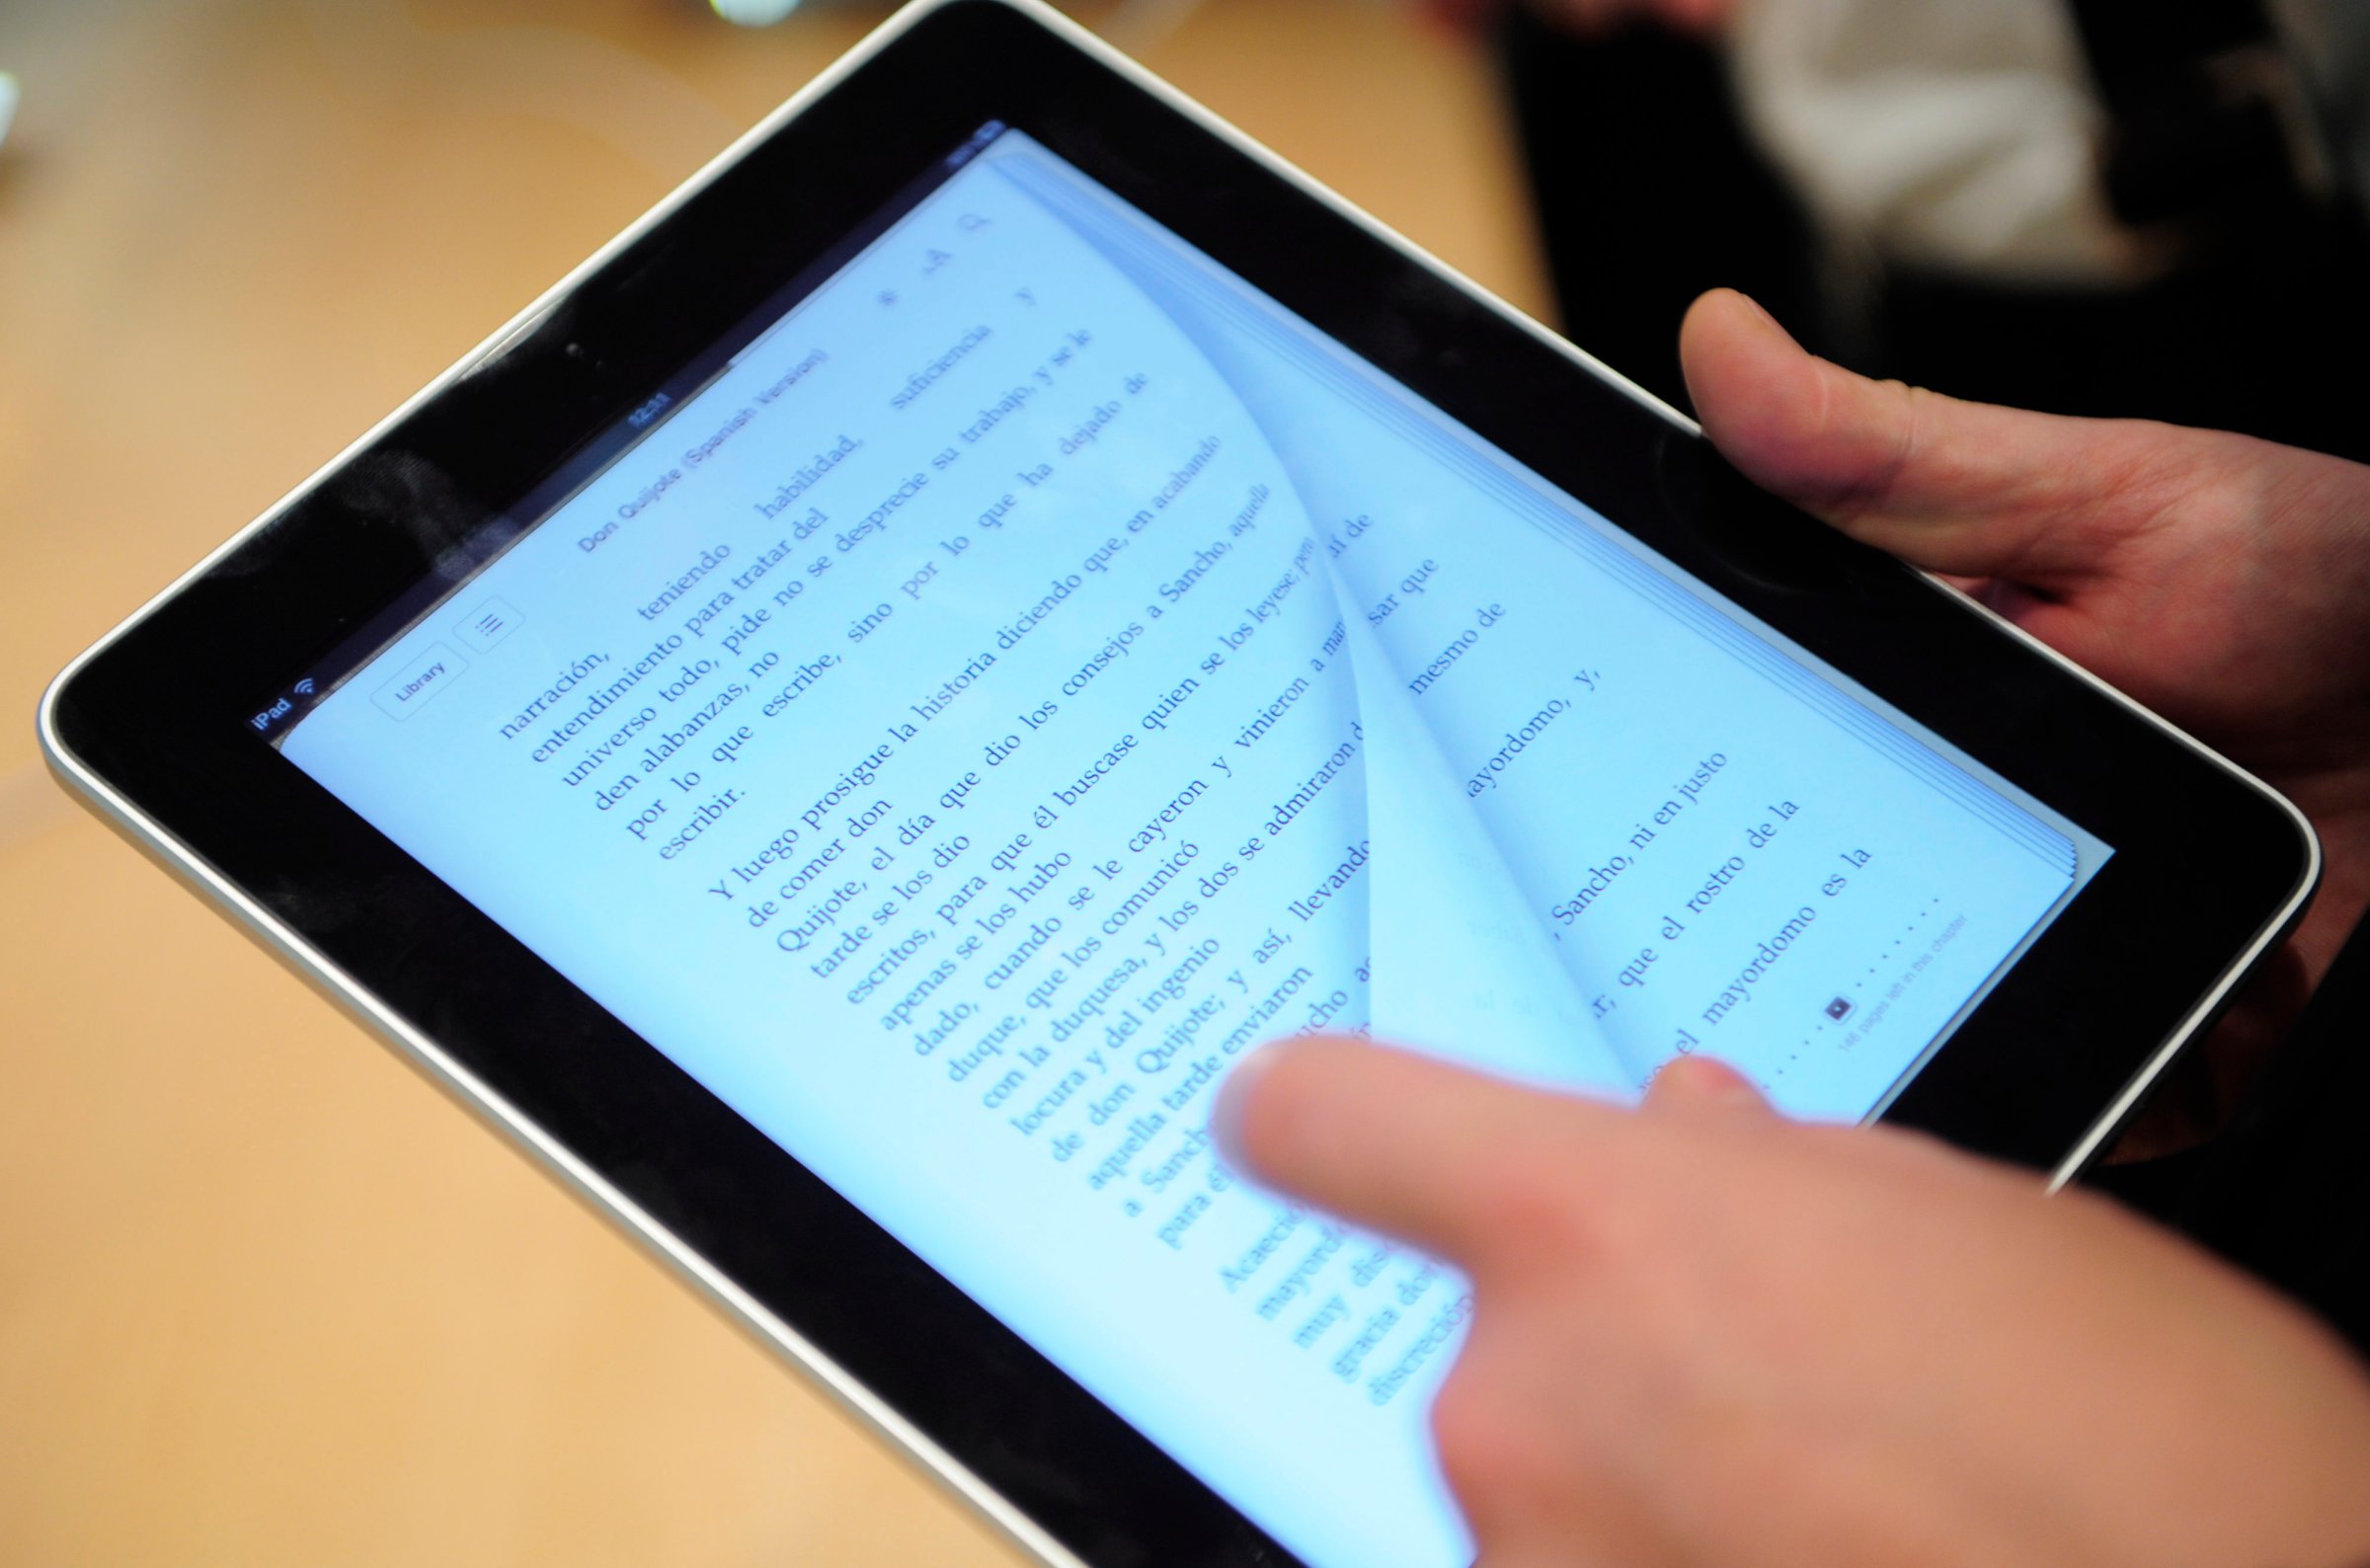 A customer is reading on an iPad at an Apple store Barcelona on May 28, 2010.